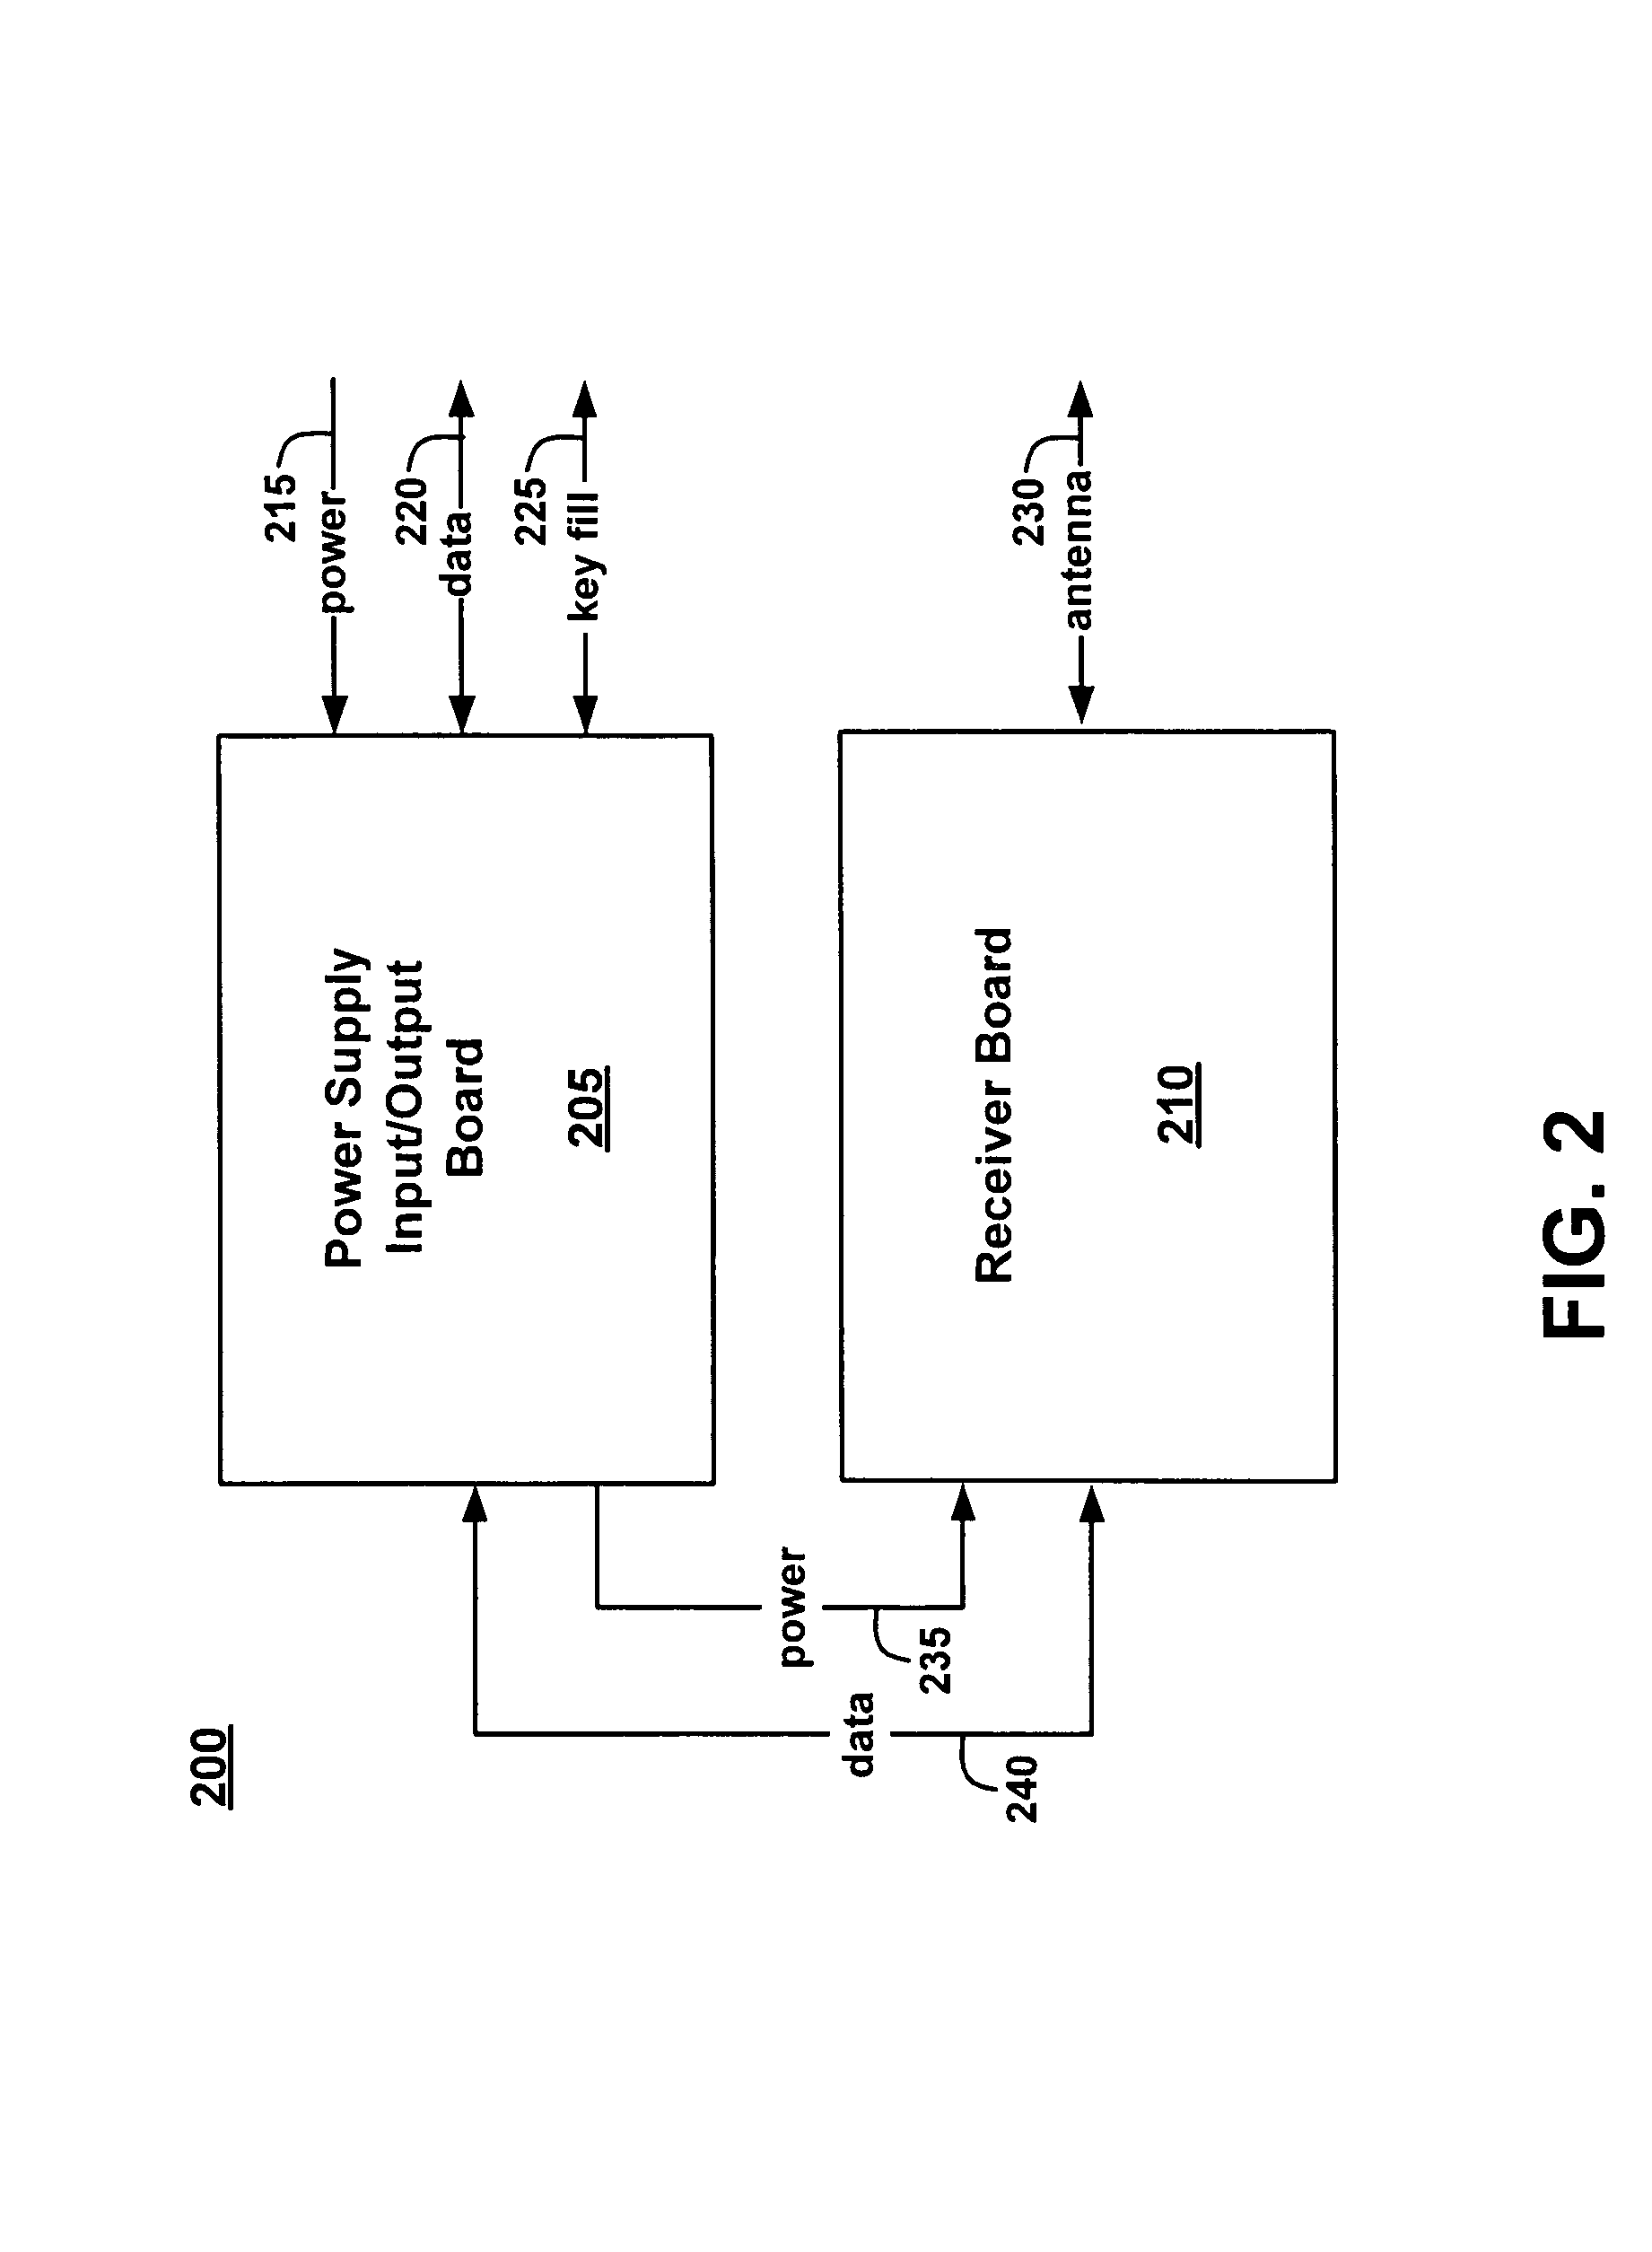 System and method for built-in testing of a GPS receiver